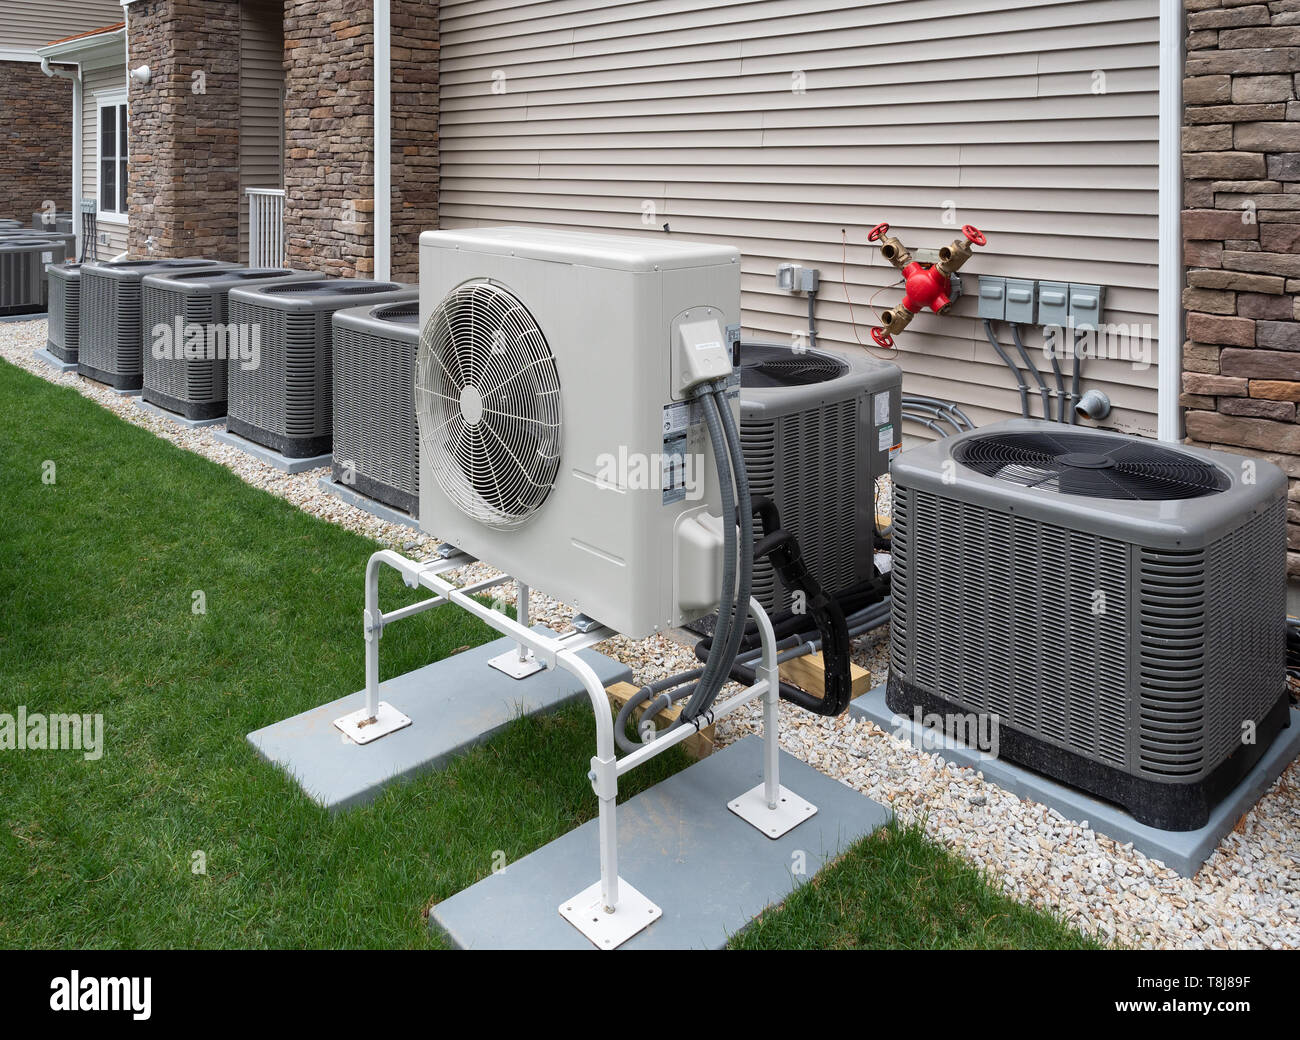 Outdoor air conditioning and heat pump units Stock Photo